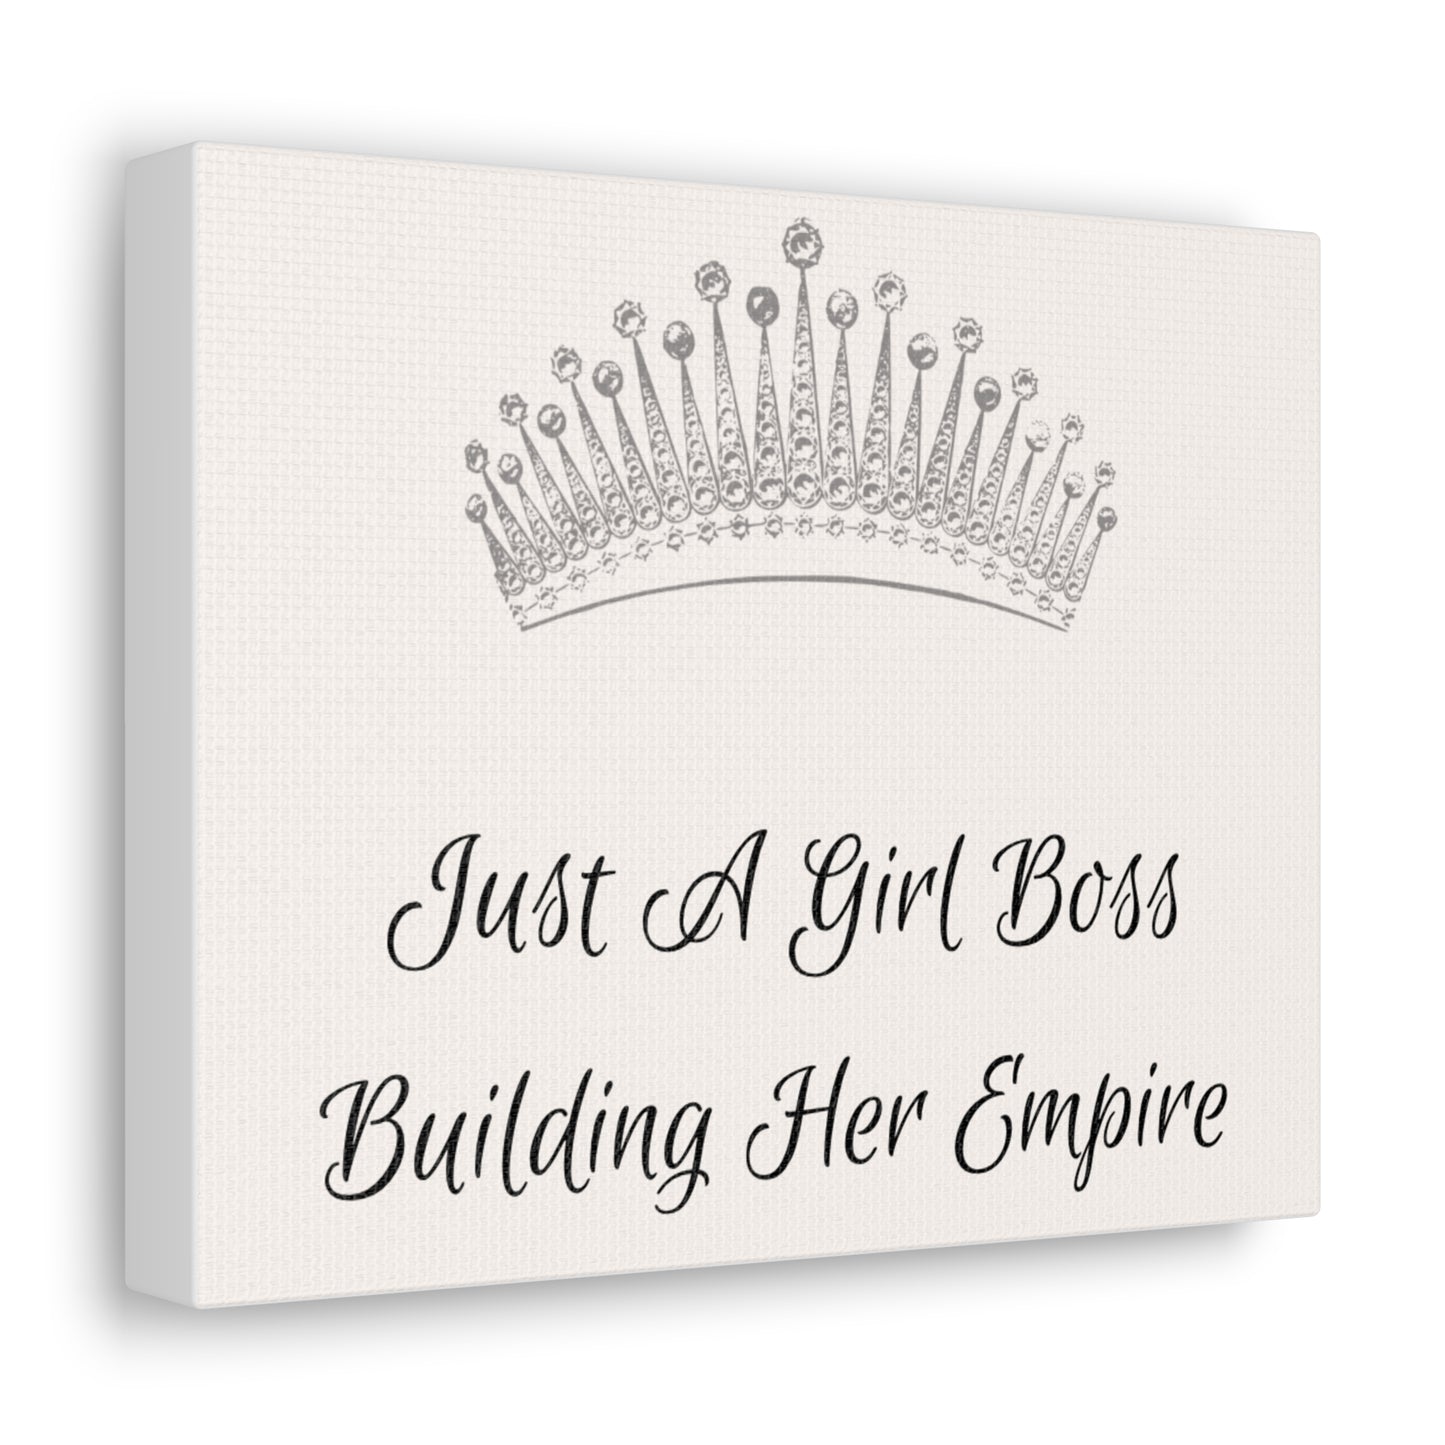 Just a girl boss building her empire Canvas Gallery Wrap wall art wall decor